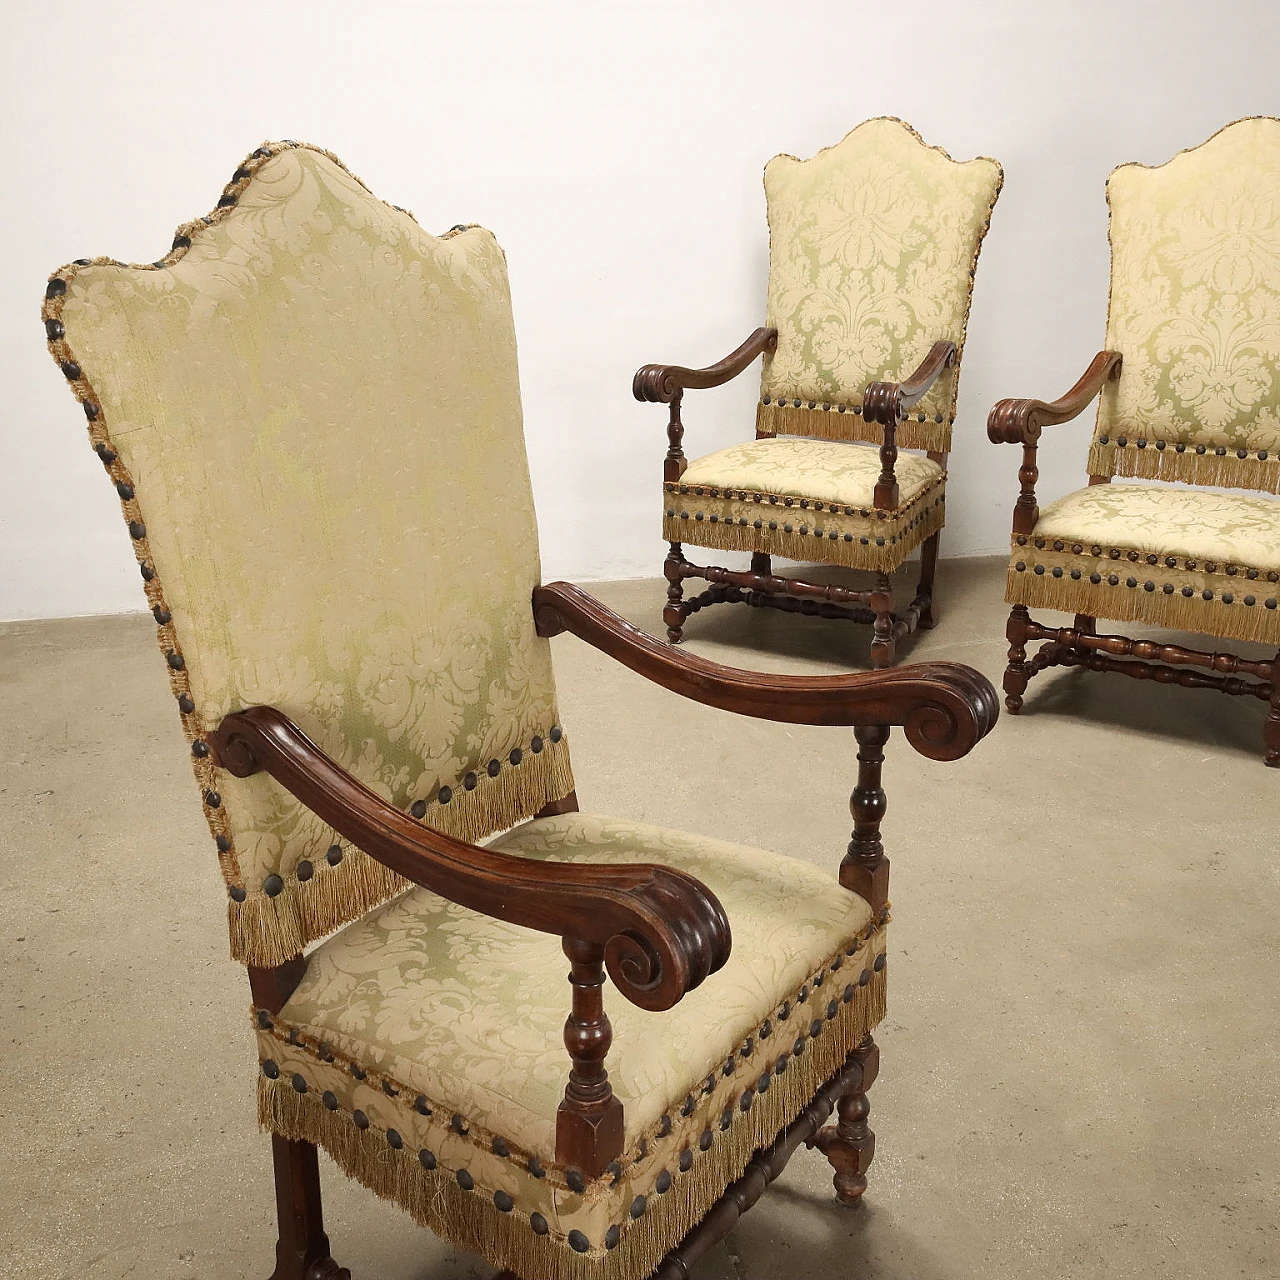 4 Carved wooden chairs, padded with brocade fabric, 19th century 3